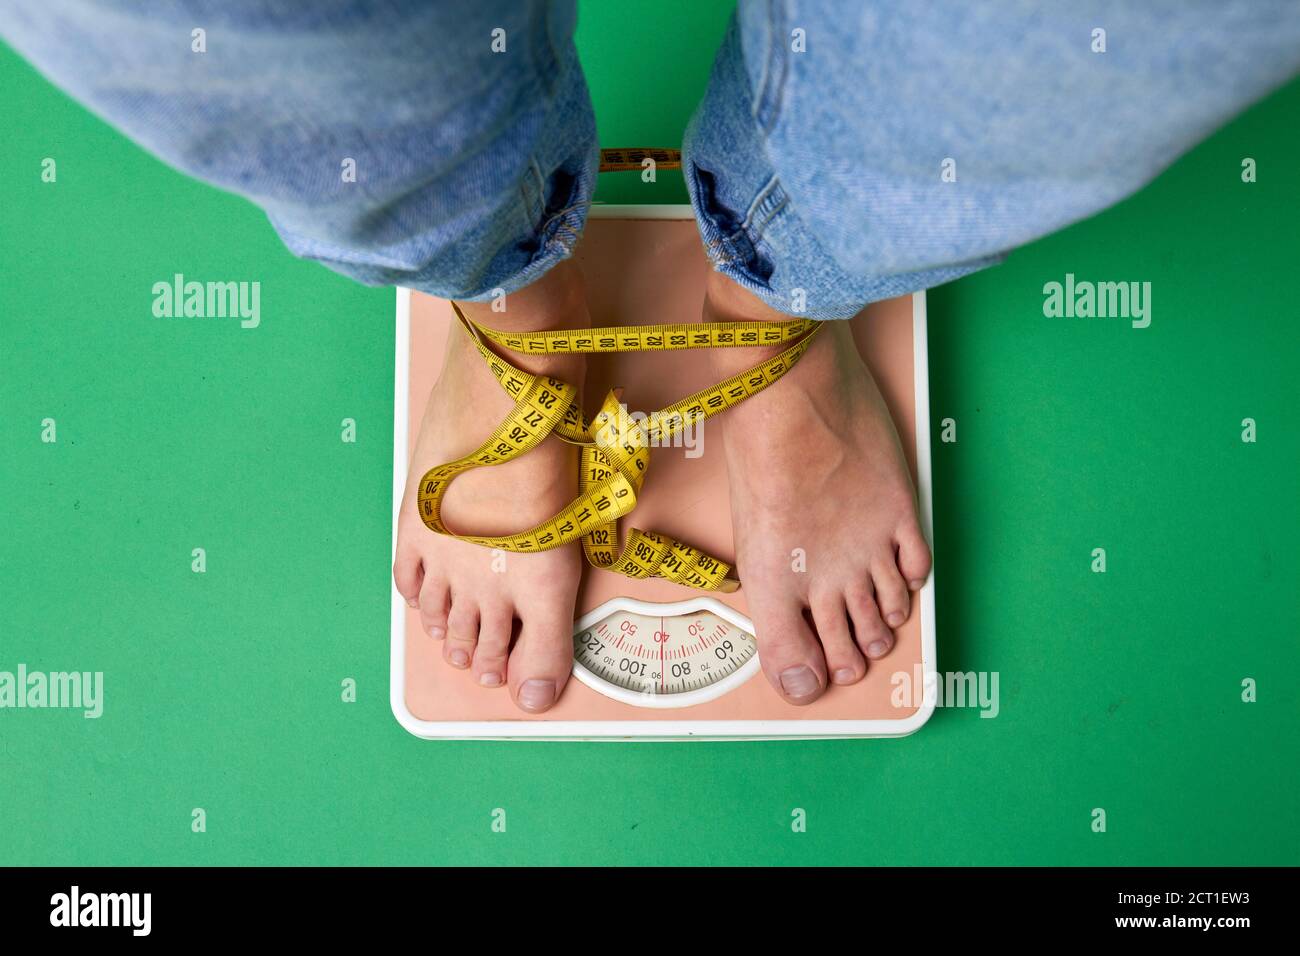 Top view wrapped with tape feet standing on scales. Stock Photo